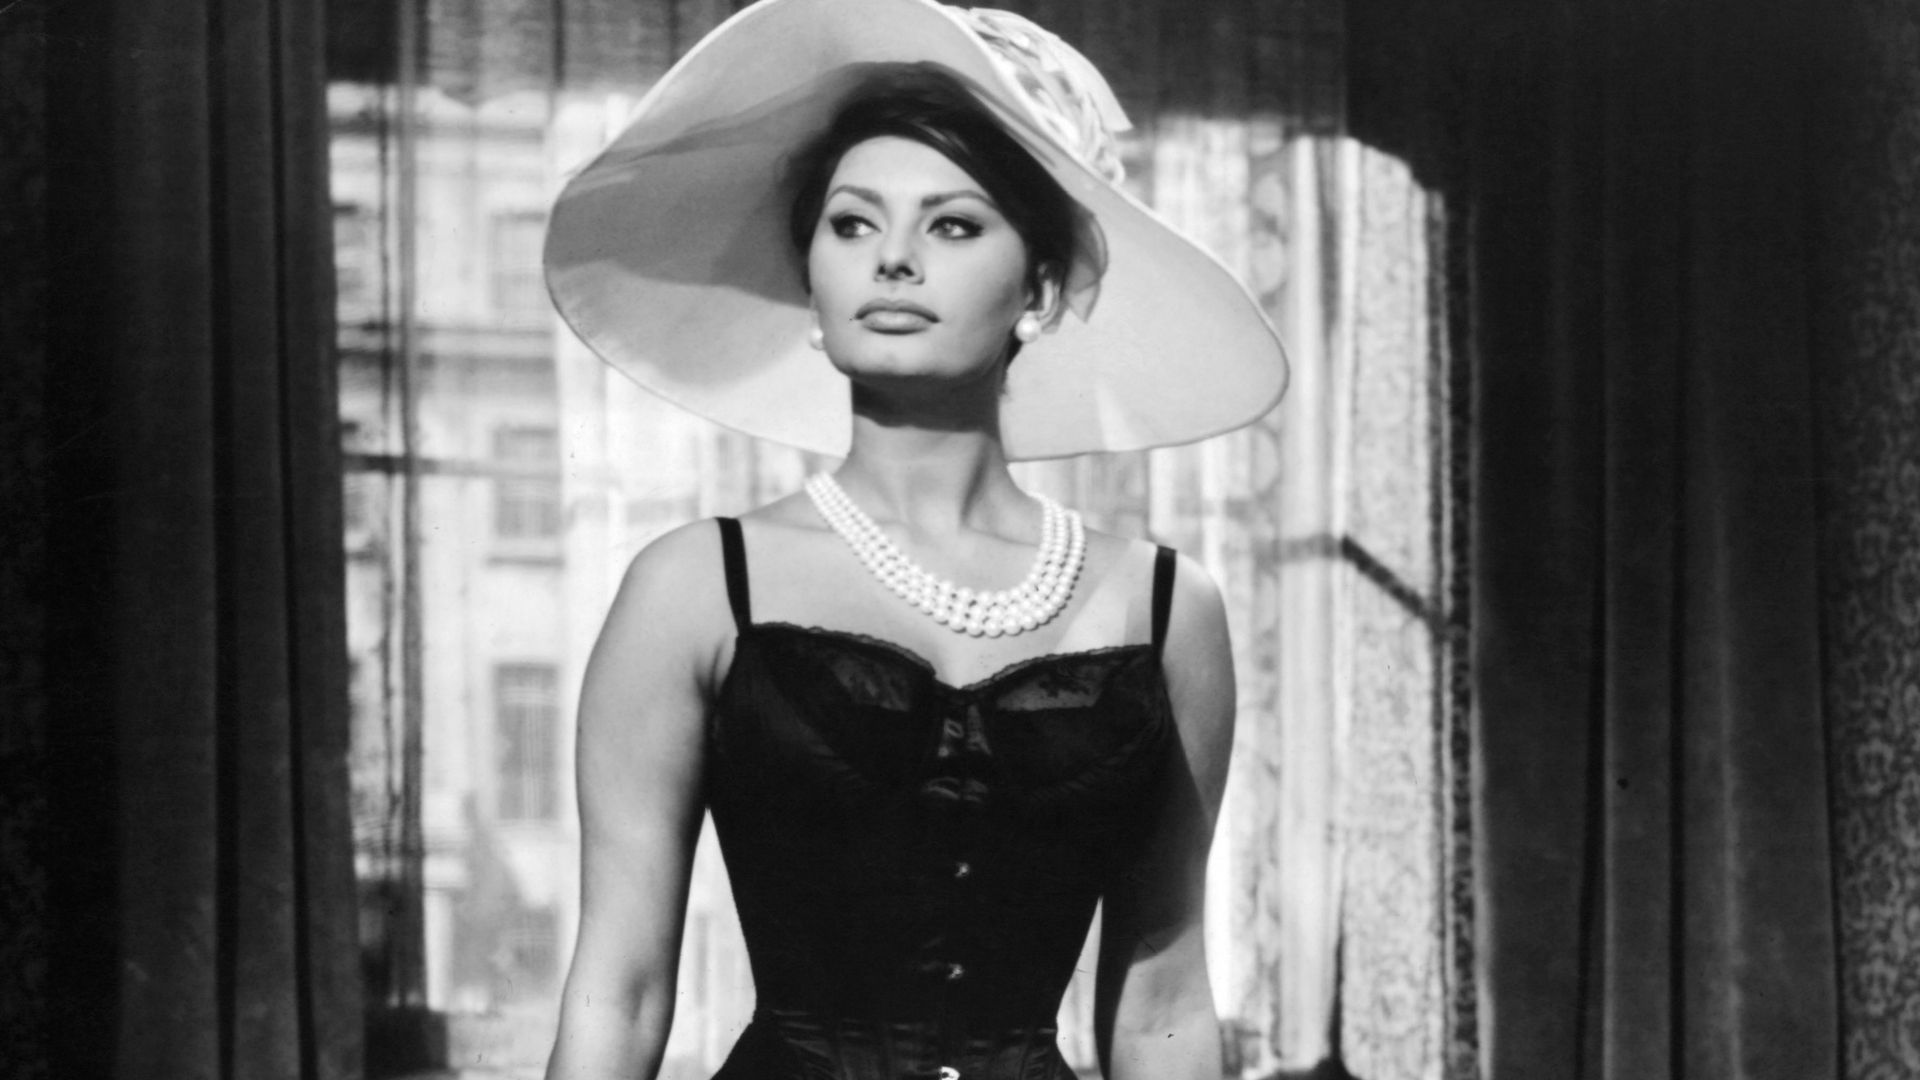 Sophia Loren wearing lingerie in a scene from the film 'The Millionairess', 1960. (Photo by 20th Century-Fox/Getty Images)